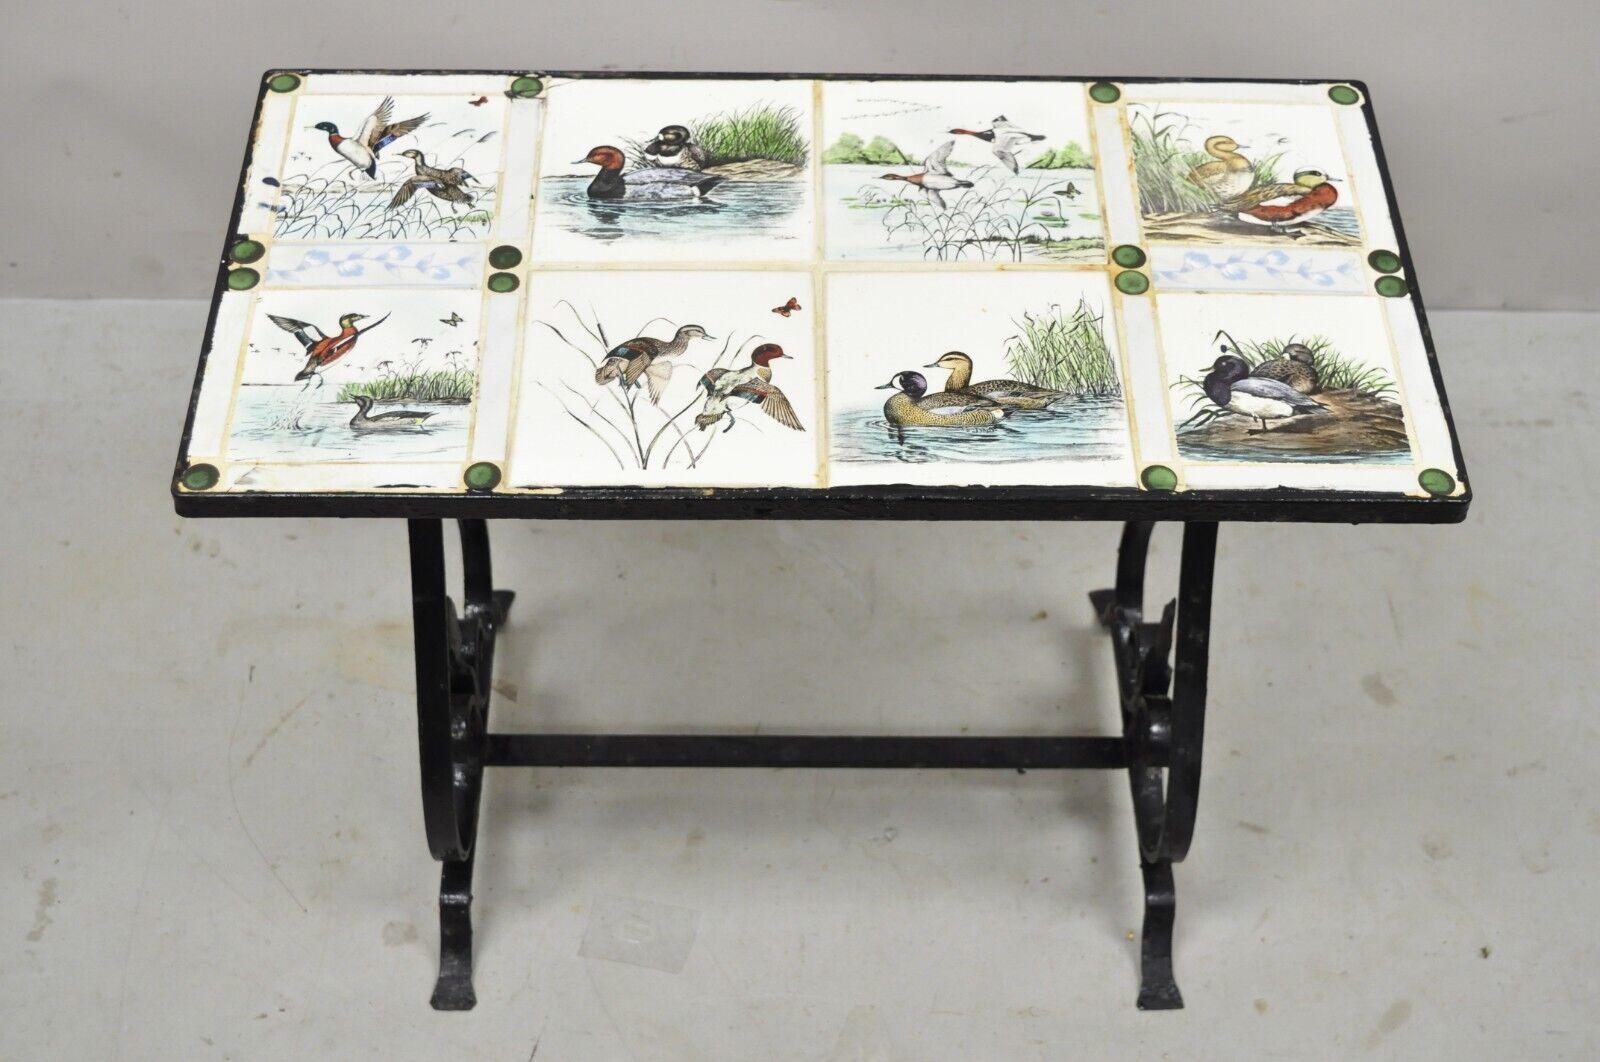 20th Century Antique Art Nouveau Wrought Iron Small Side Table with Duck Geese Tile Top For Sale